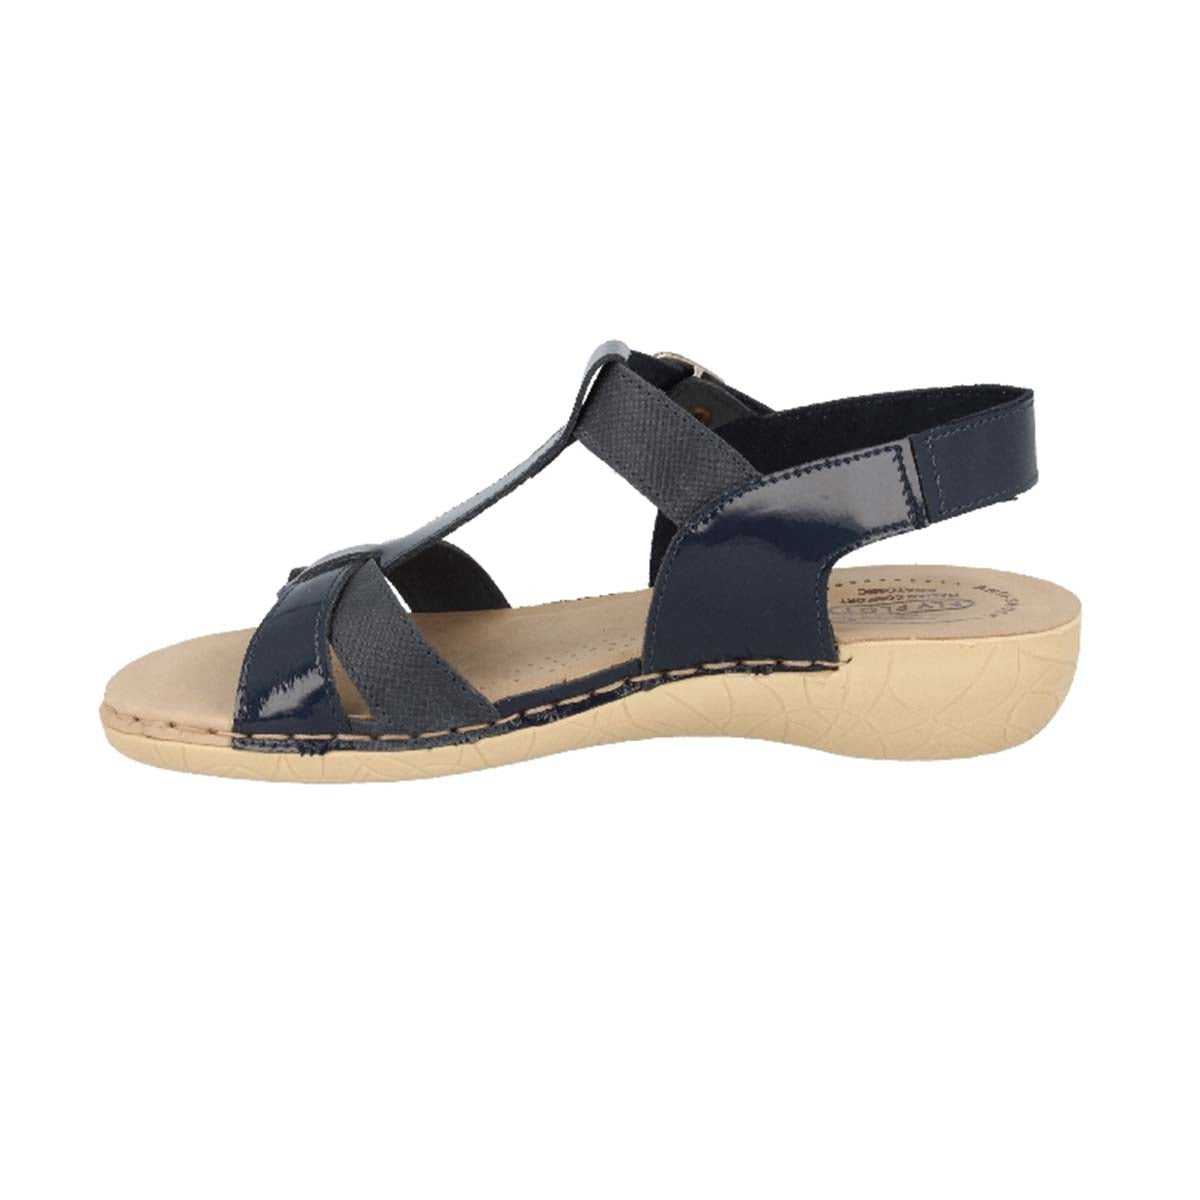 See the Blue Leather Back Strap Women Sandals in the colour BLUE, available in various sizes